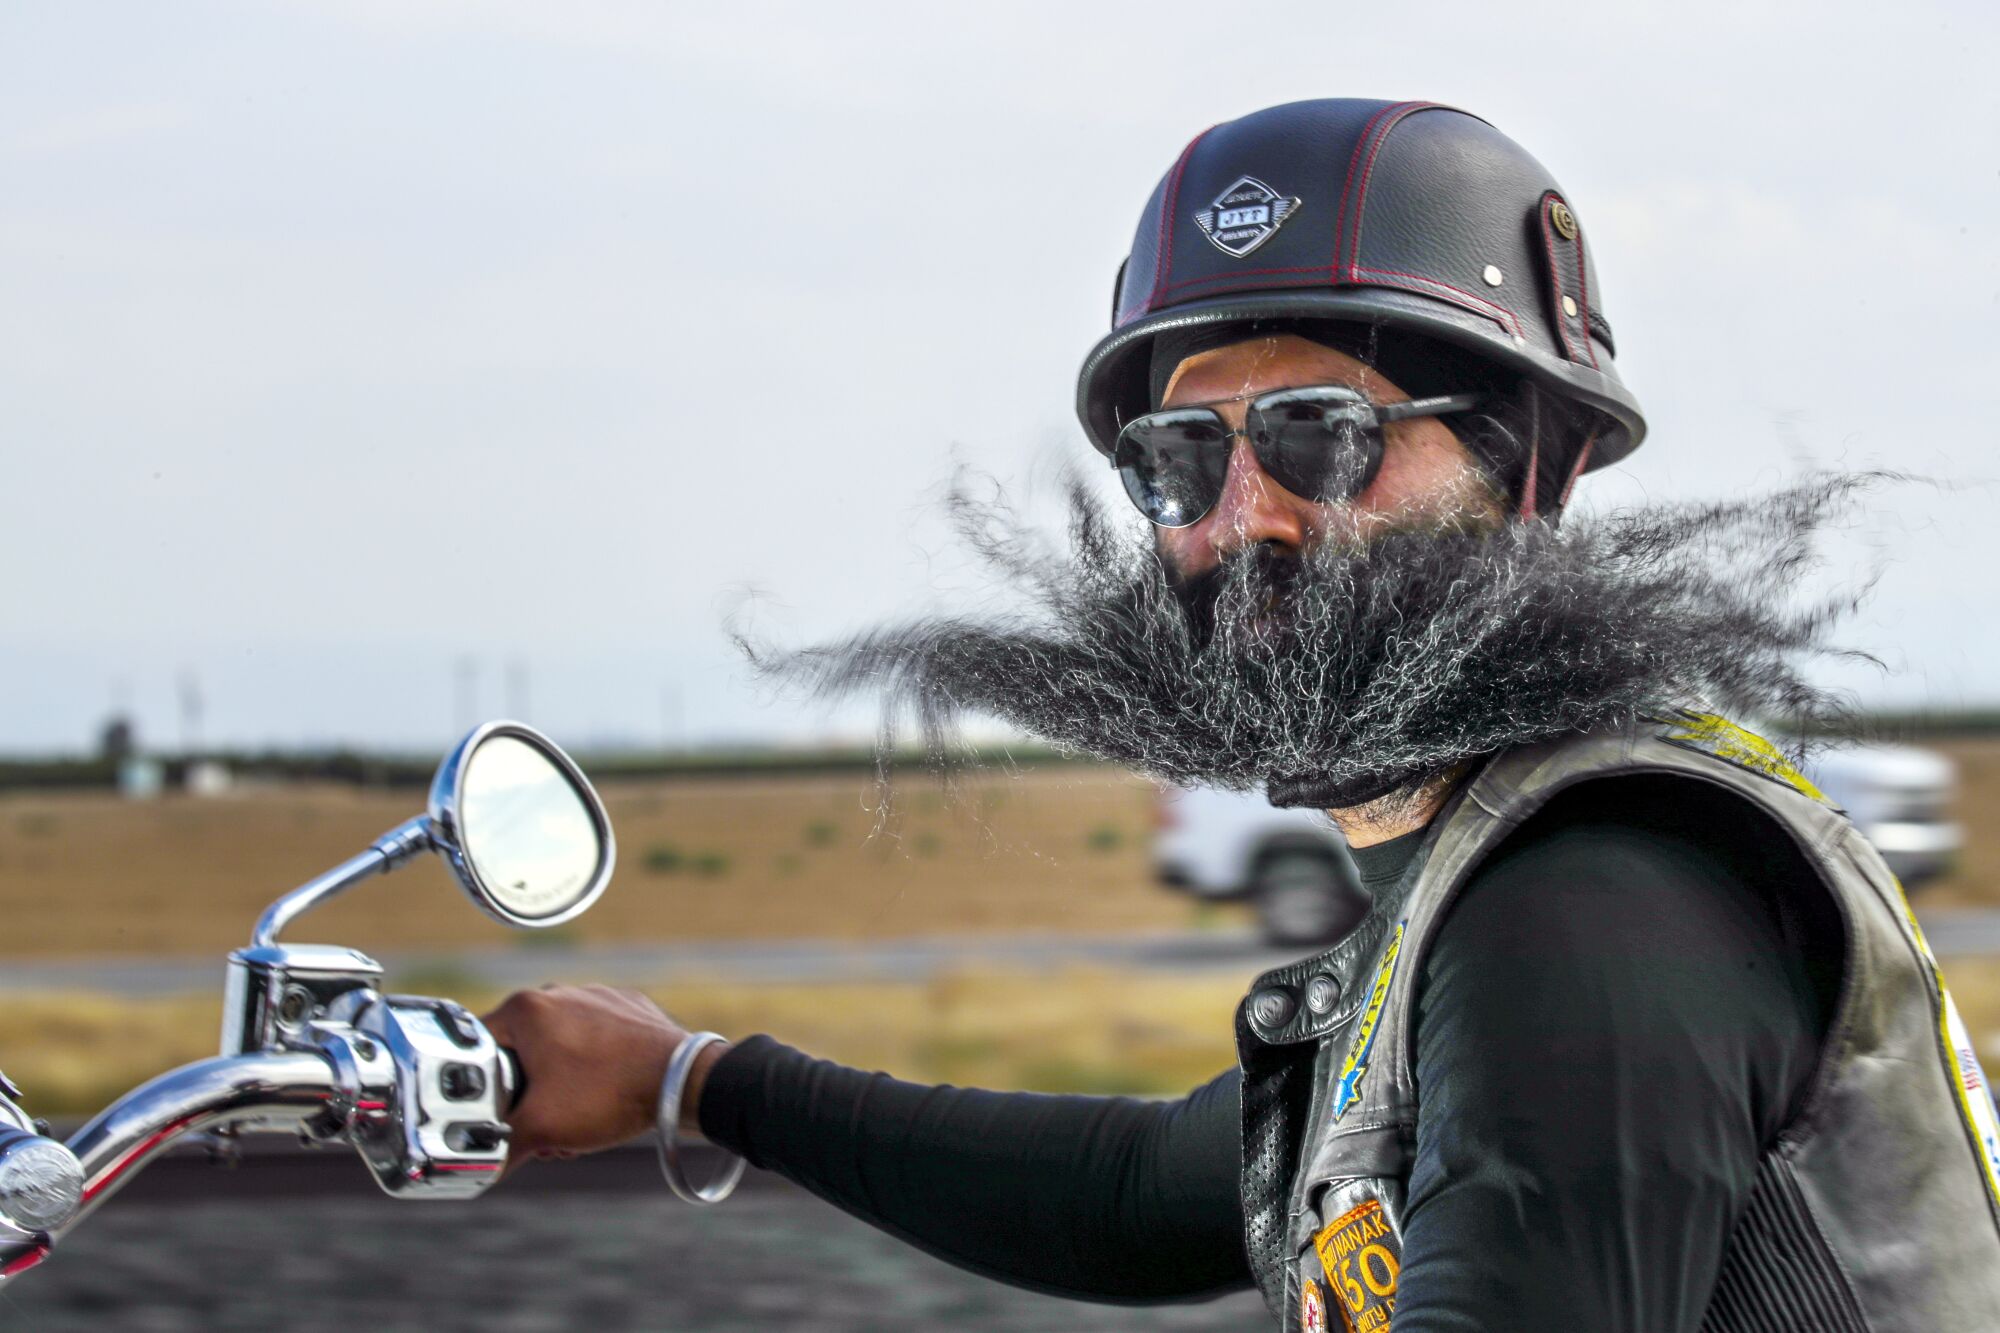 A man, wearing a leather vest and a helmet, with long salt-and-pepper beard looks at the camera while riding a motorcycle